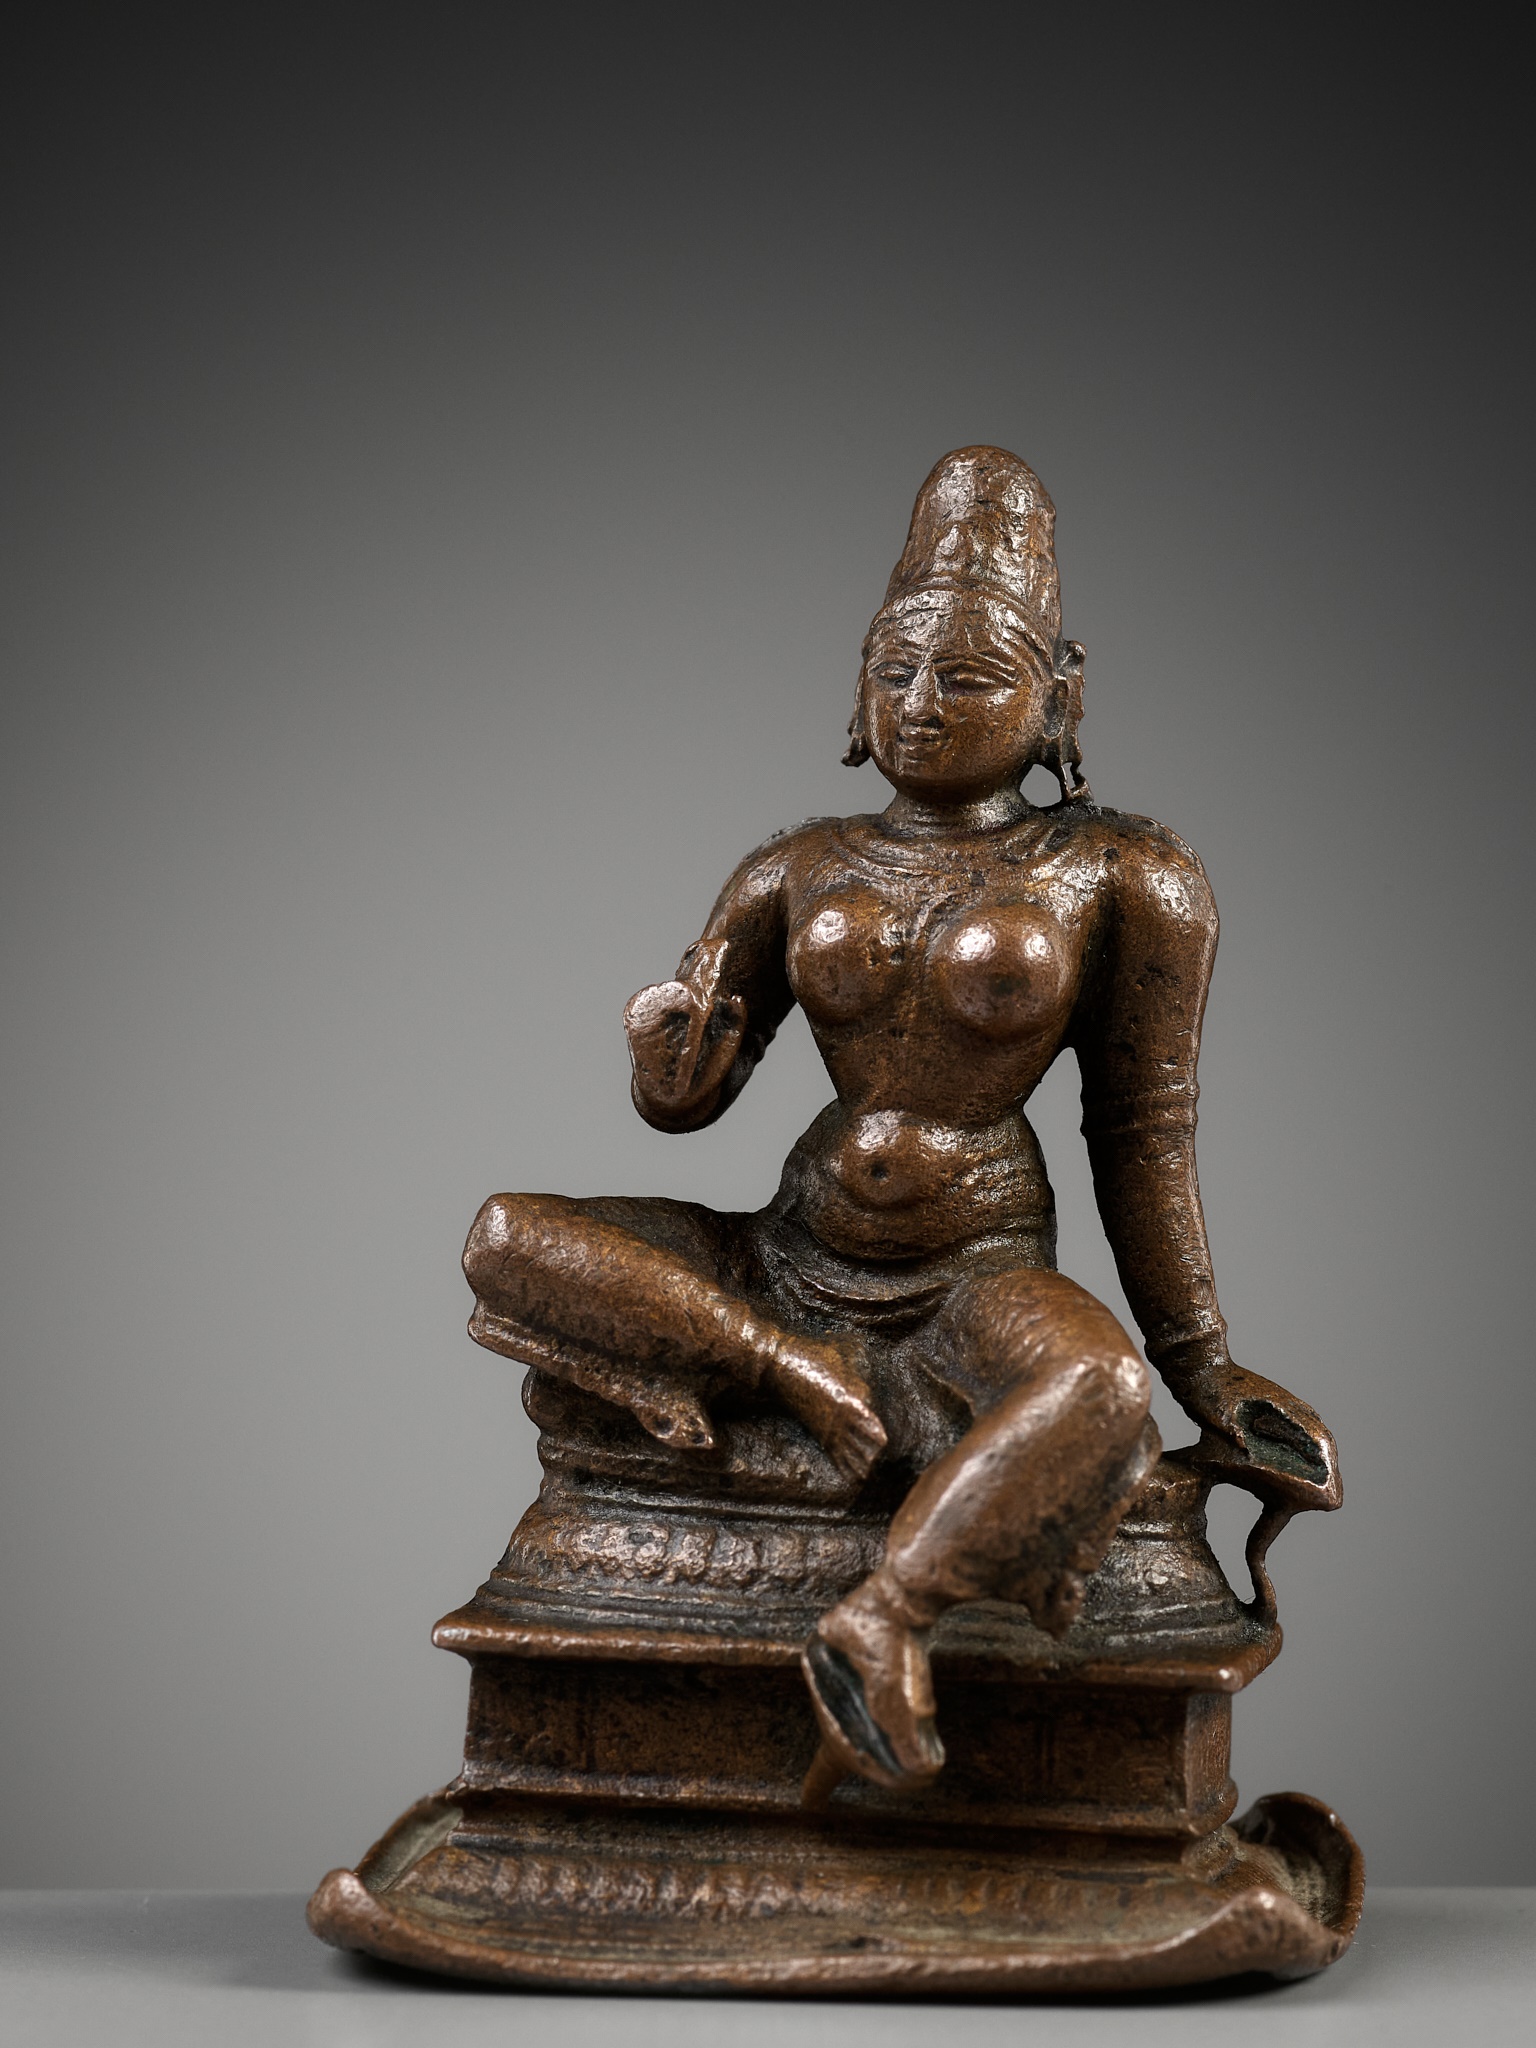 A SMALL COPPER ALLOY FIGURE OF PARVATI, LATER CHOLA - Image 8 of 9